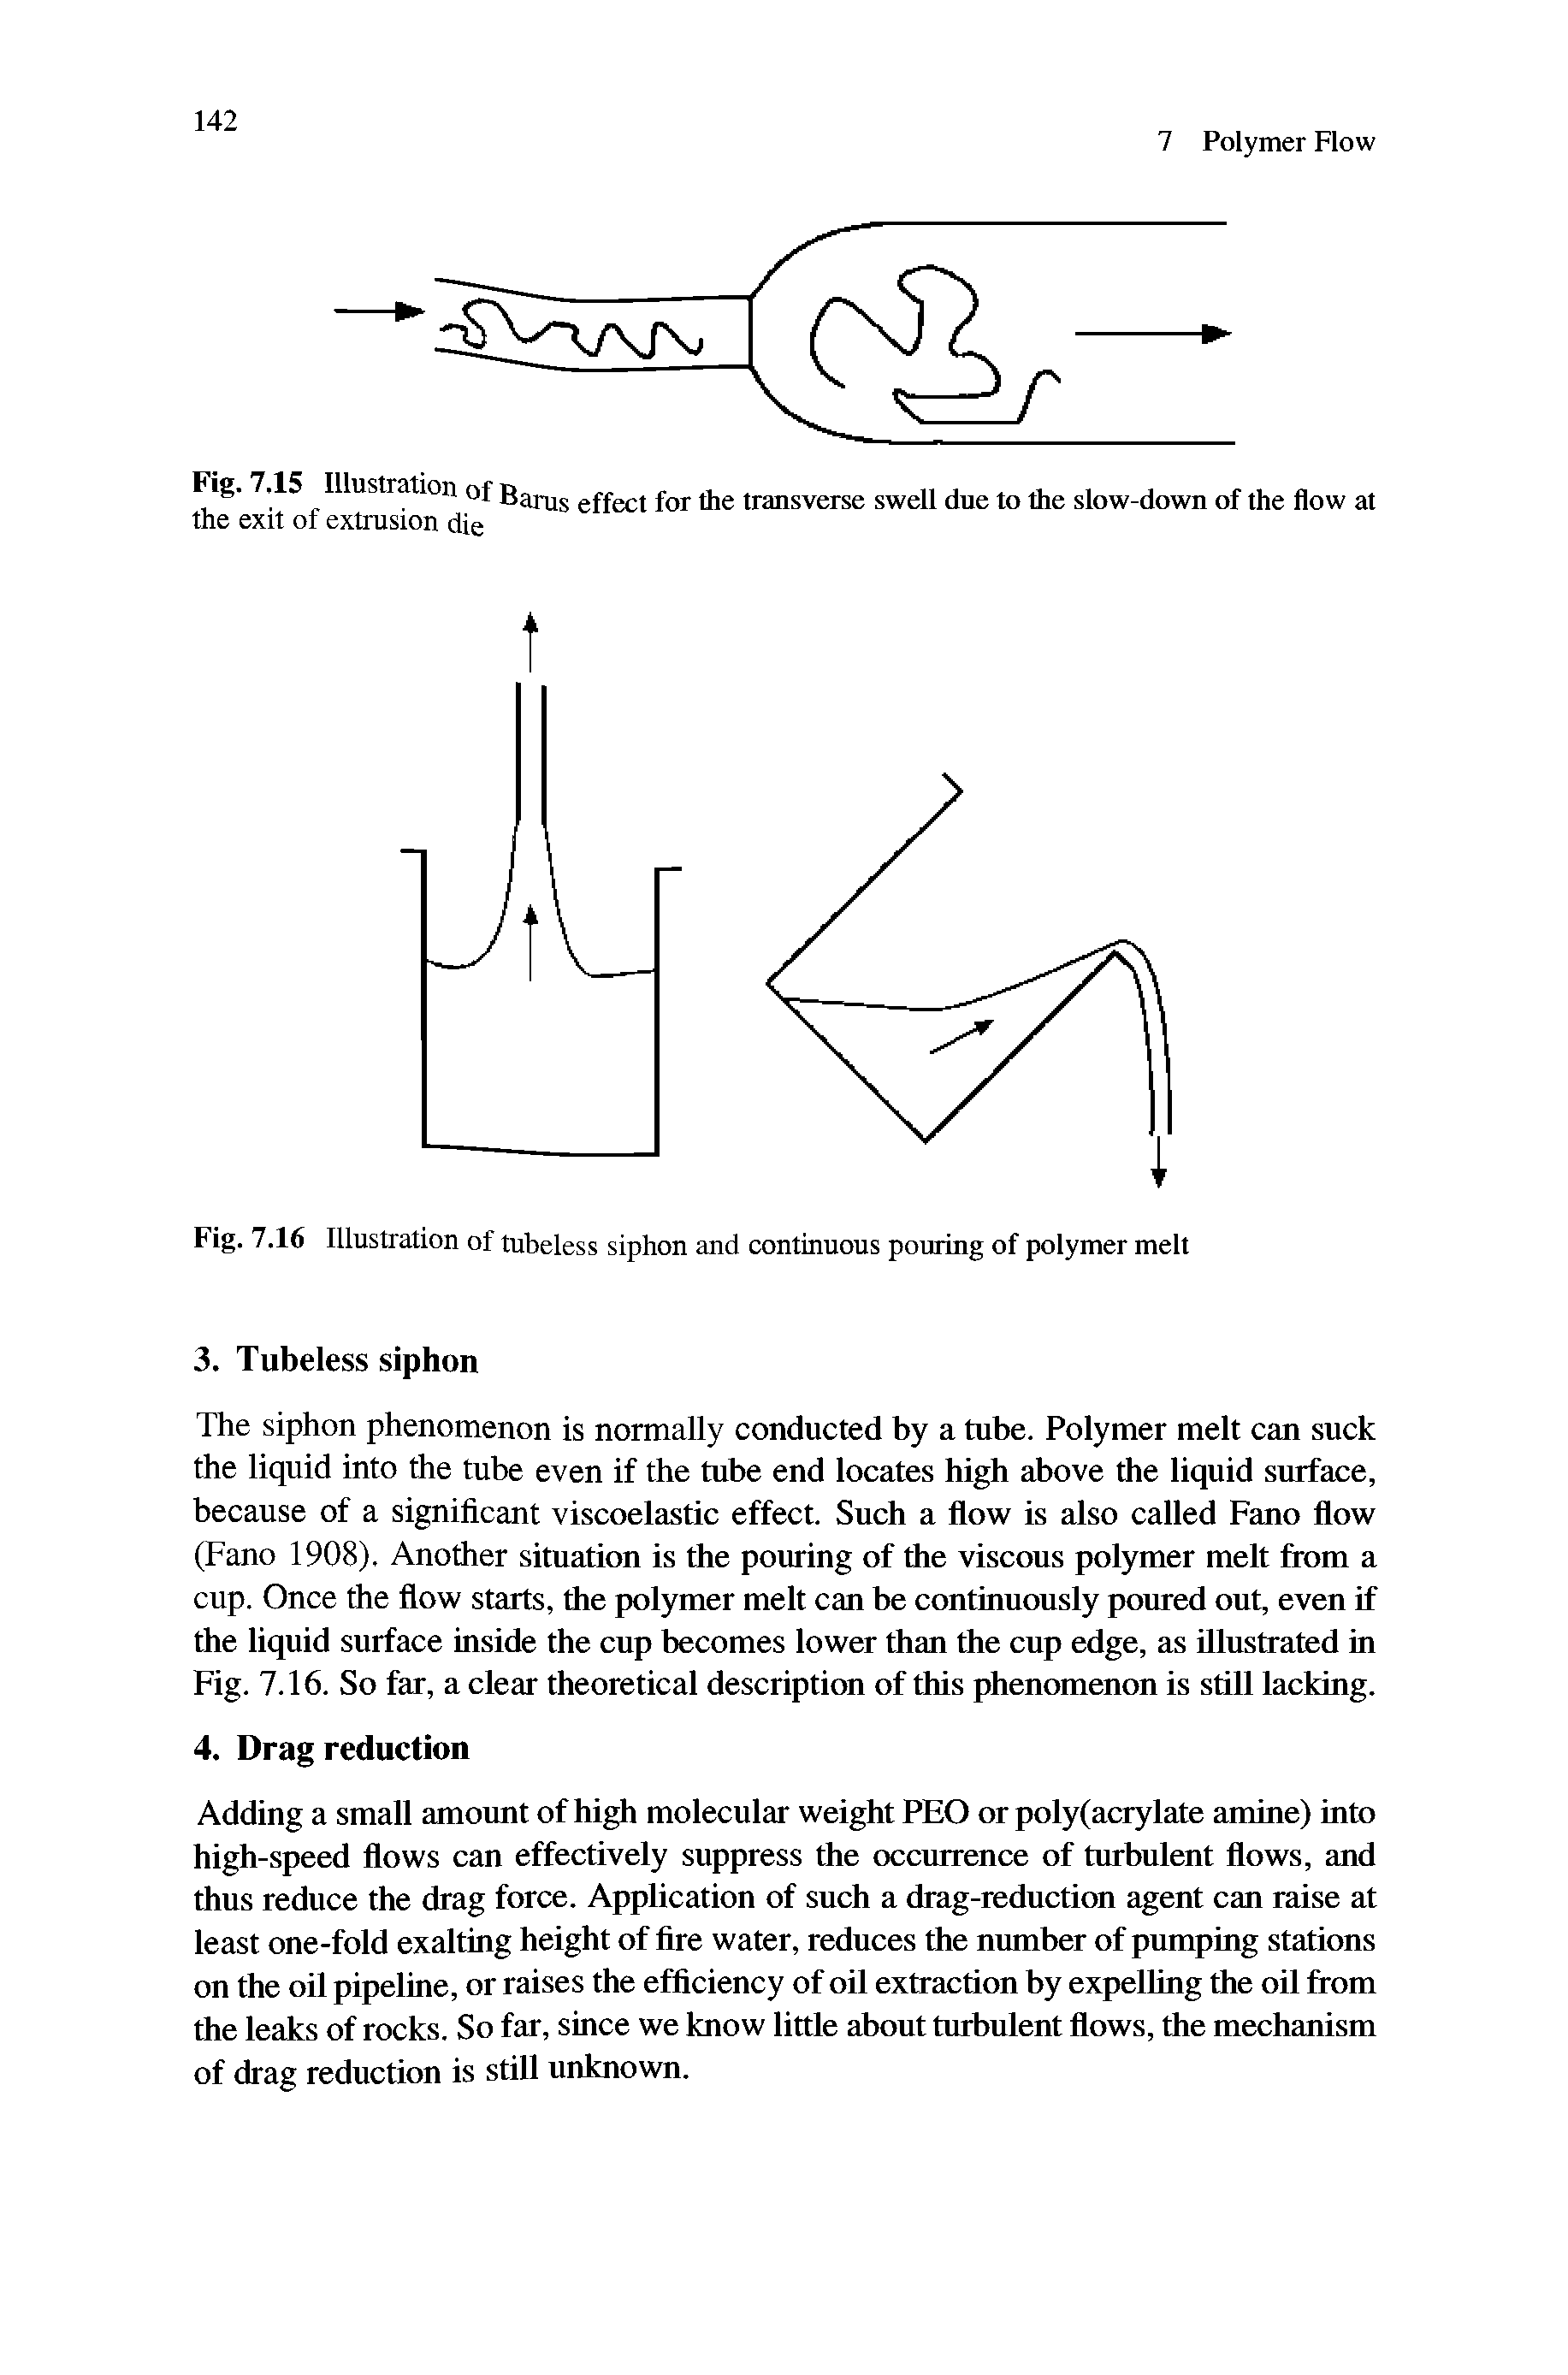 Fig. 7.16 Illustration of tubeless siphon and continuous pouring of polymer melt...